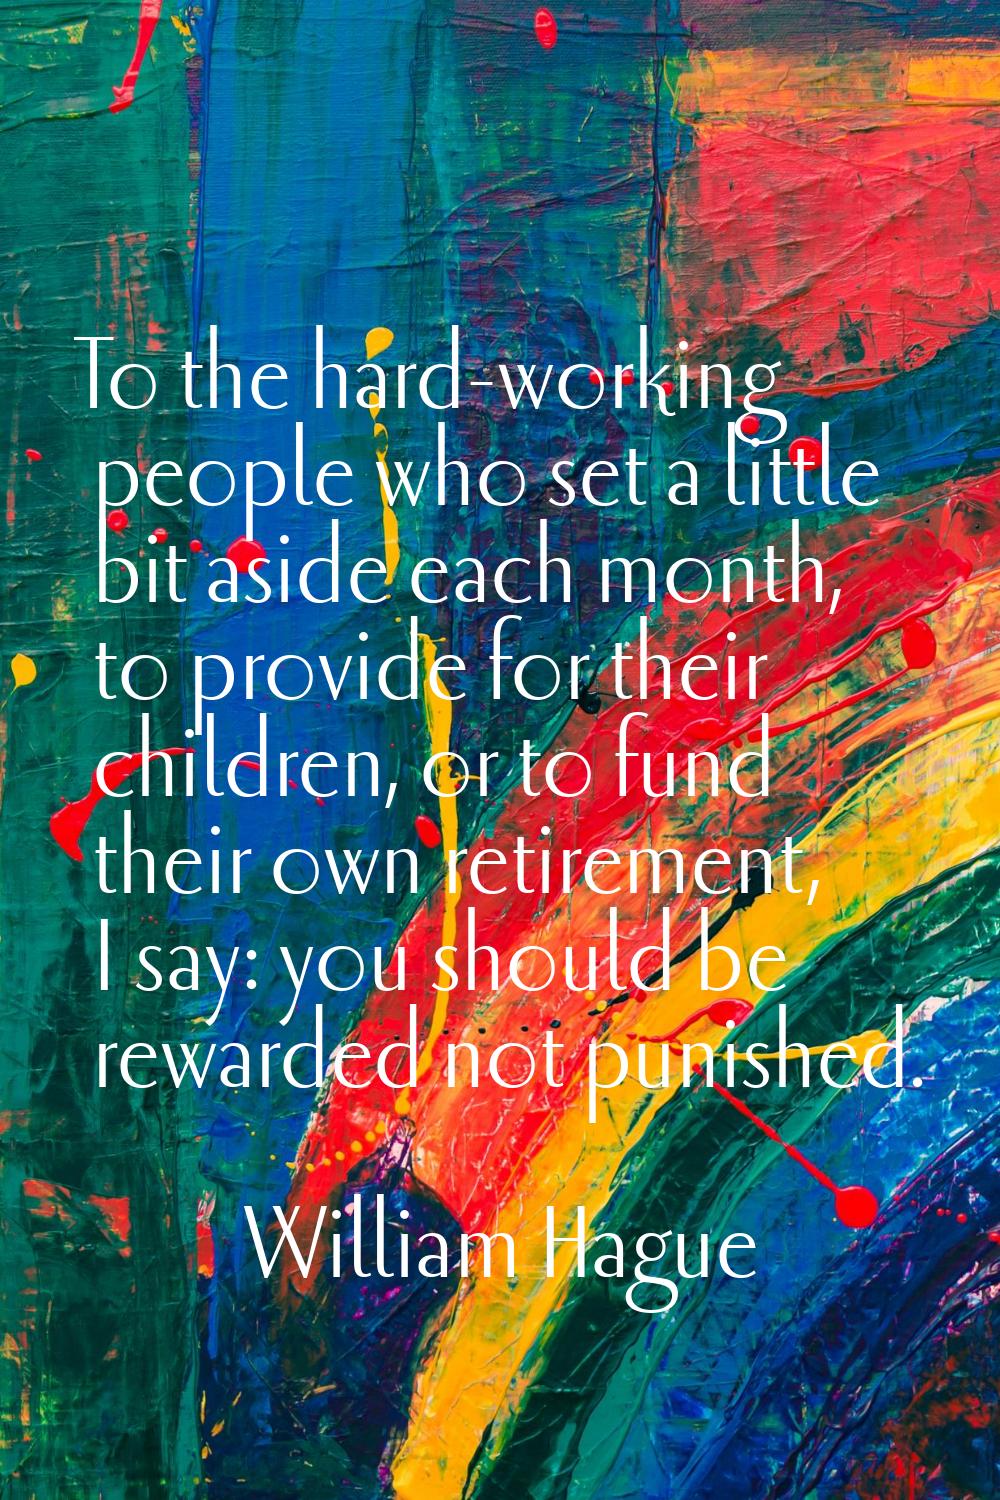 To the hard-working people who set a little bit aside each month, to provide for their children, or